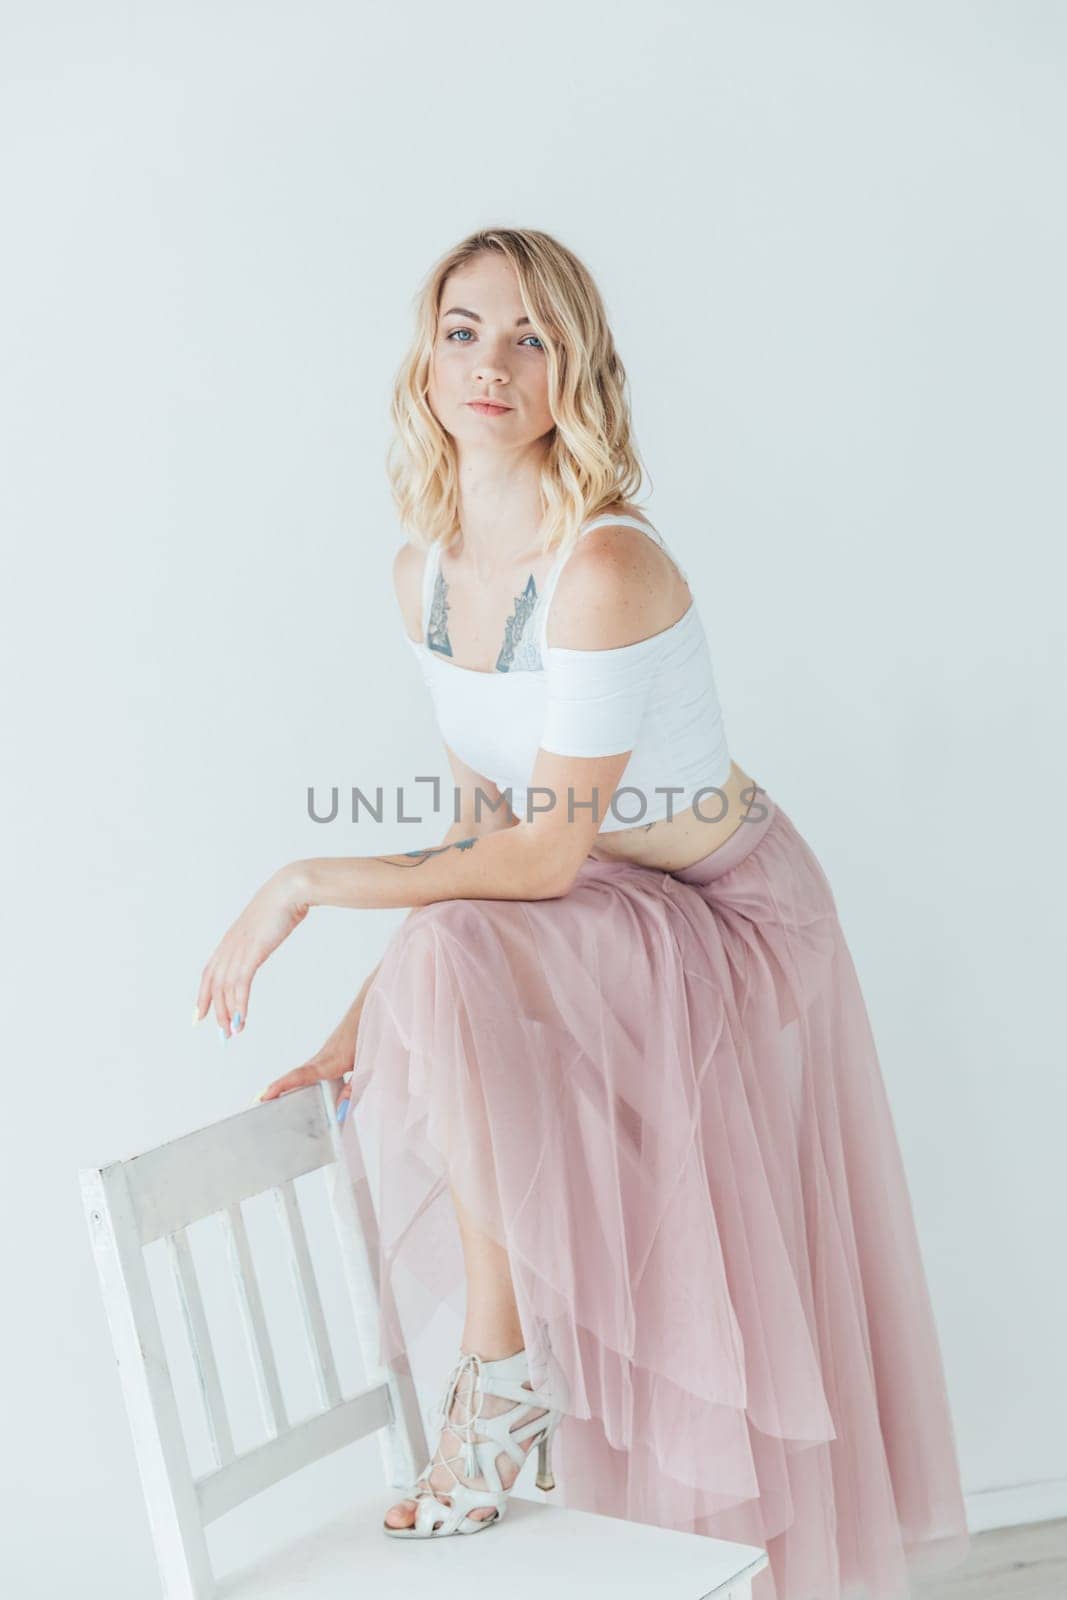 beautiful woman posing on a chair in a bright room